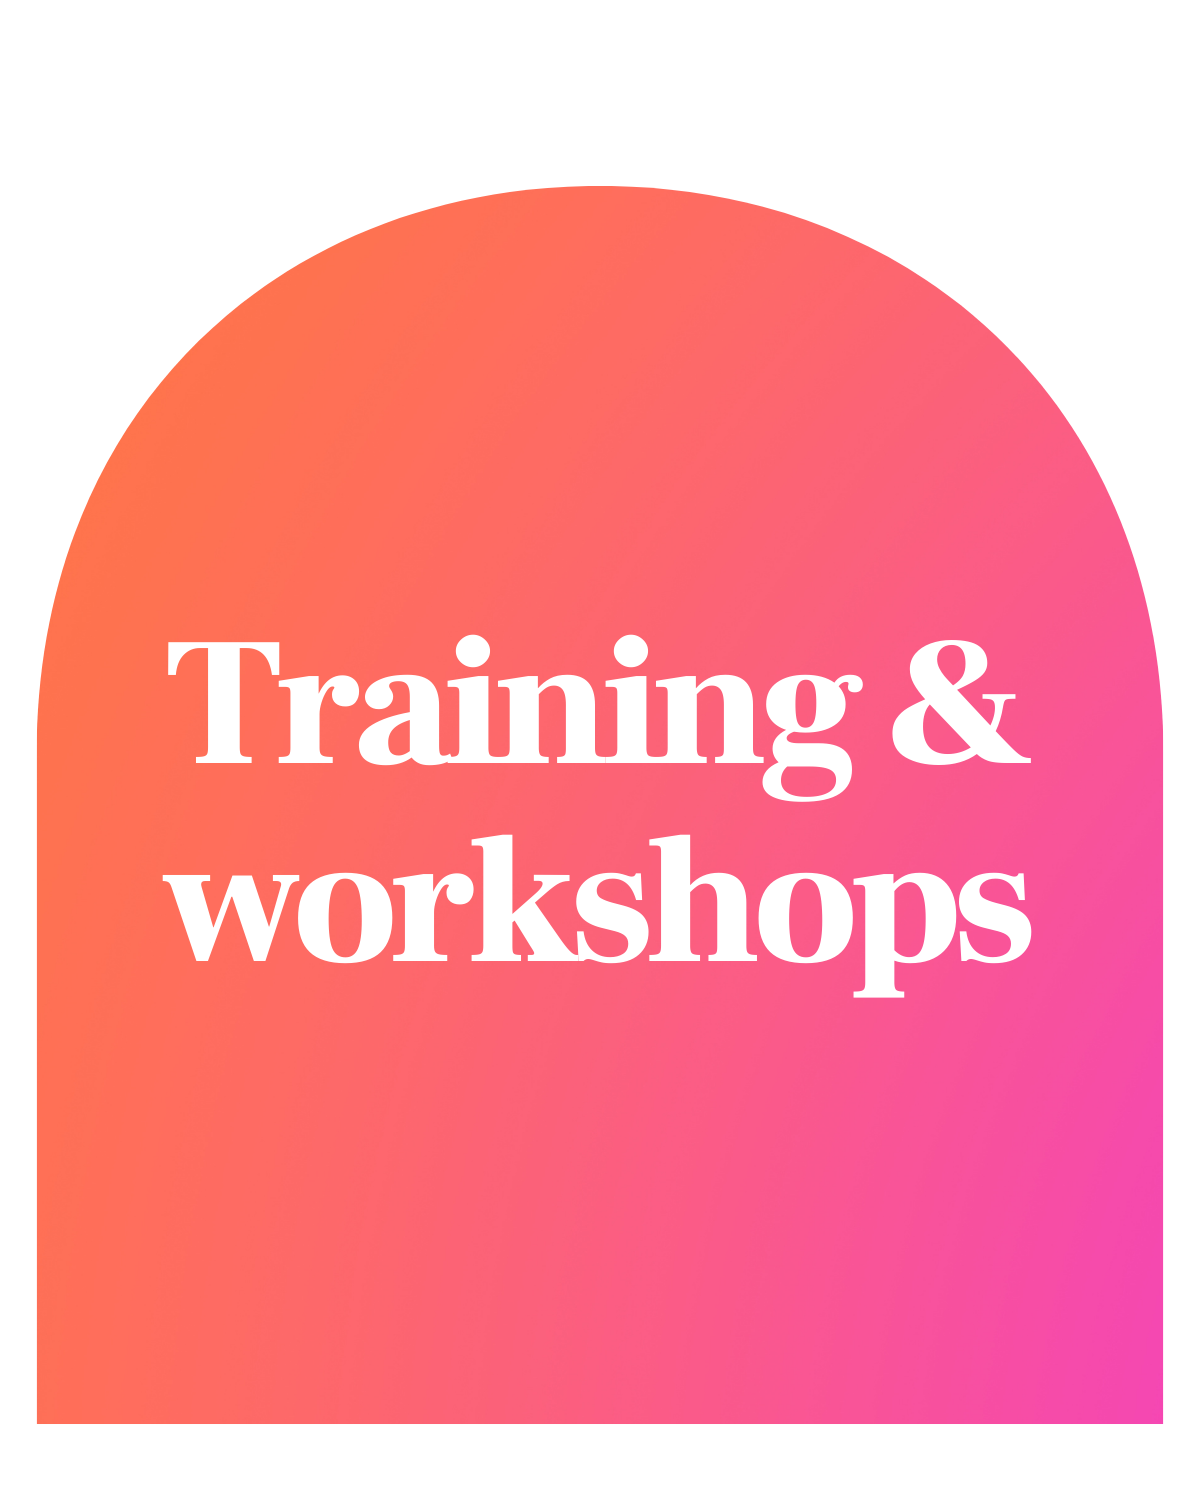 Workshops and training